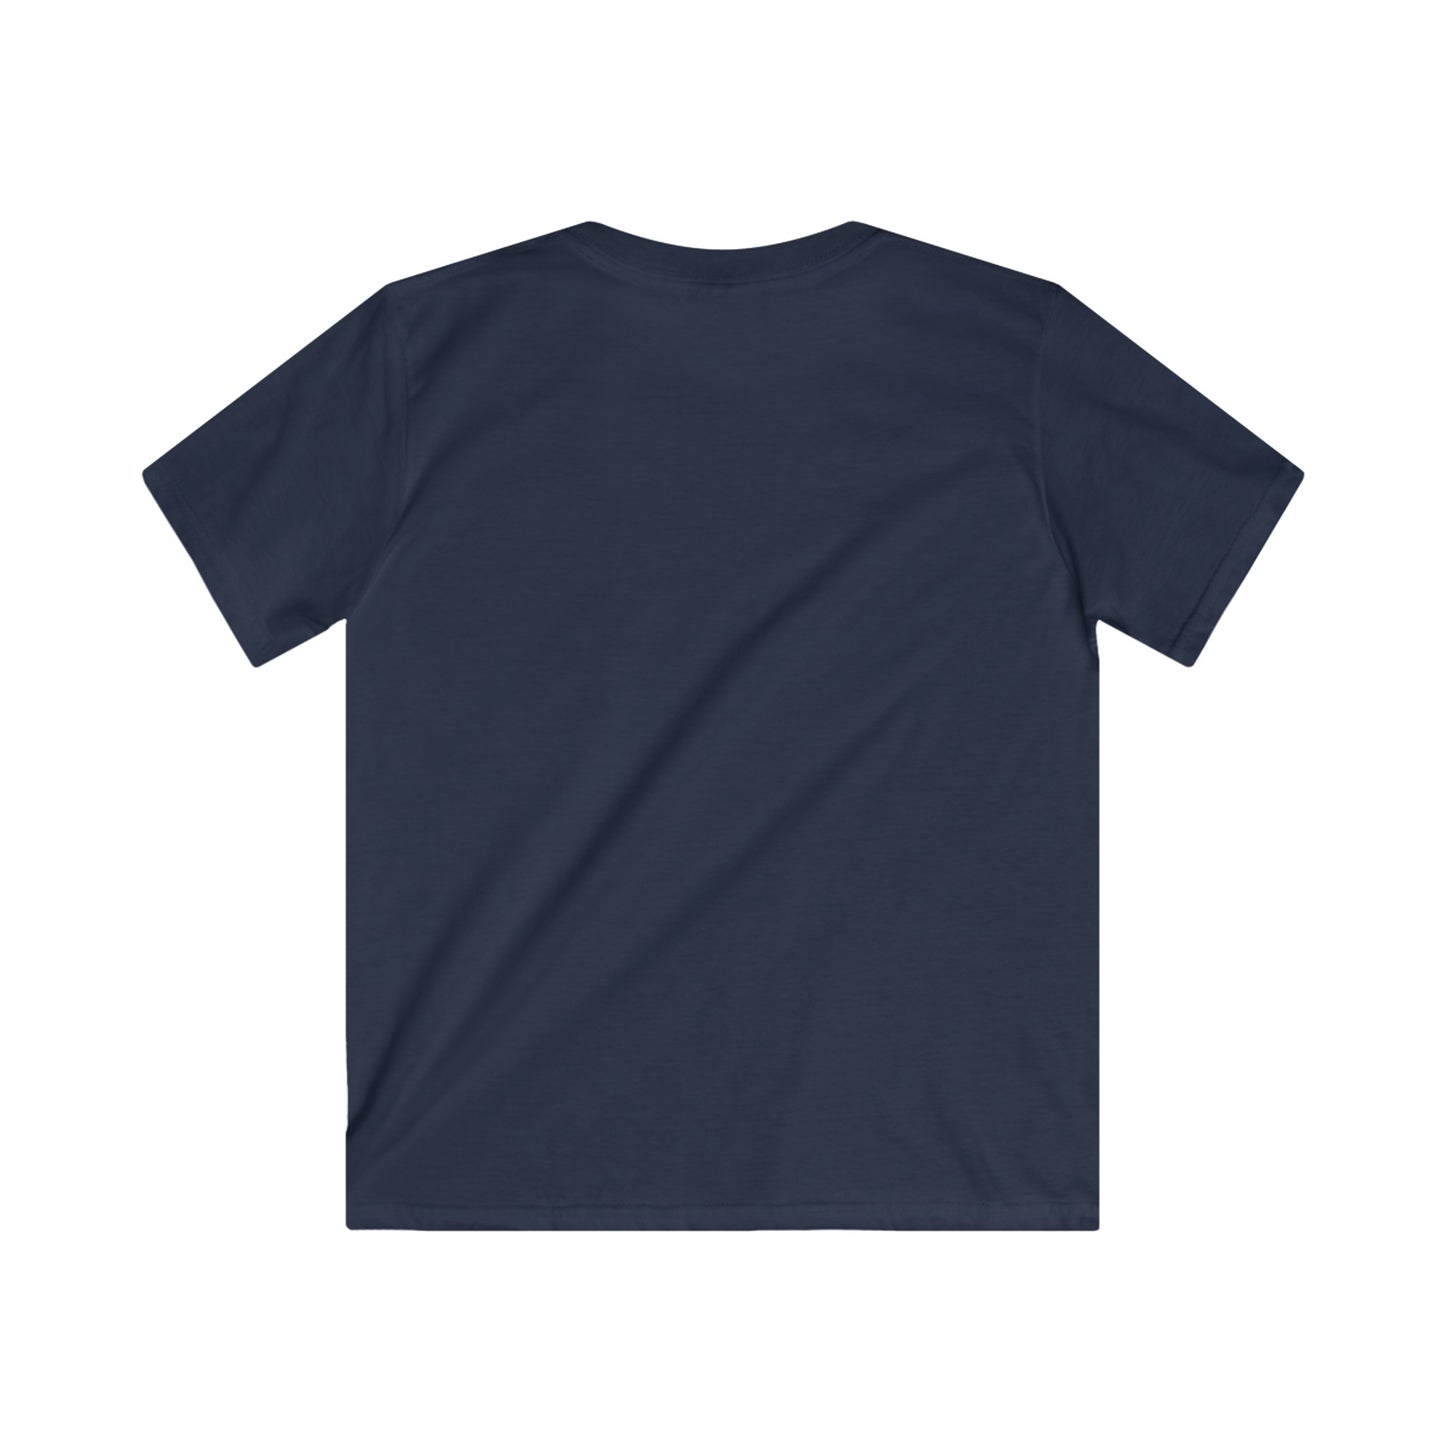 Solid Navy. Kids Softstyle Tee